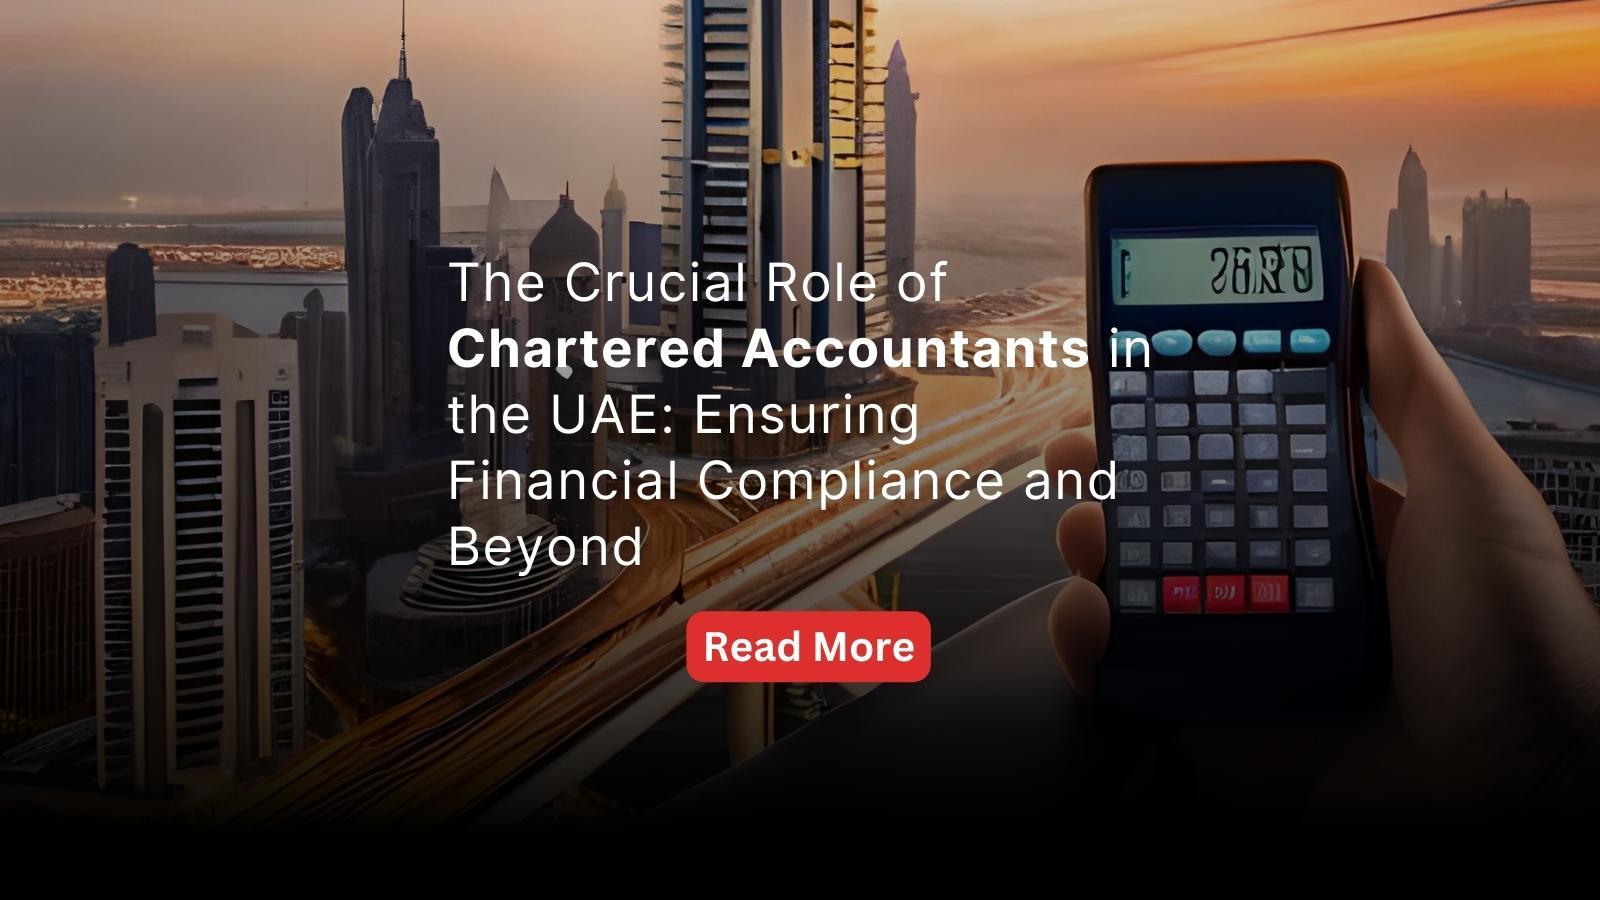 The Role of Chartered Accountants in UAE: Ensuring Financial Compliance